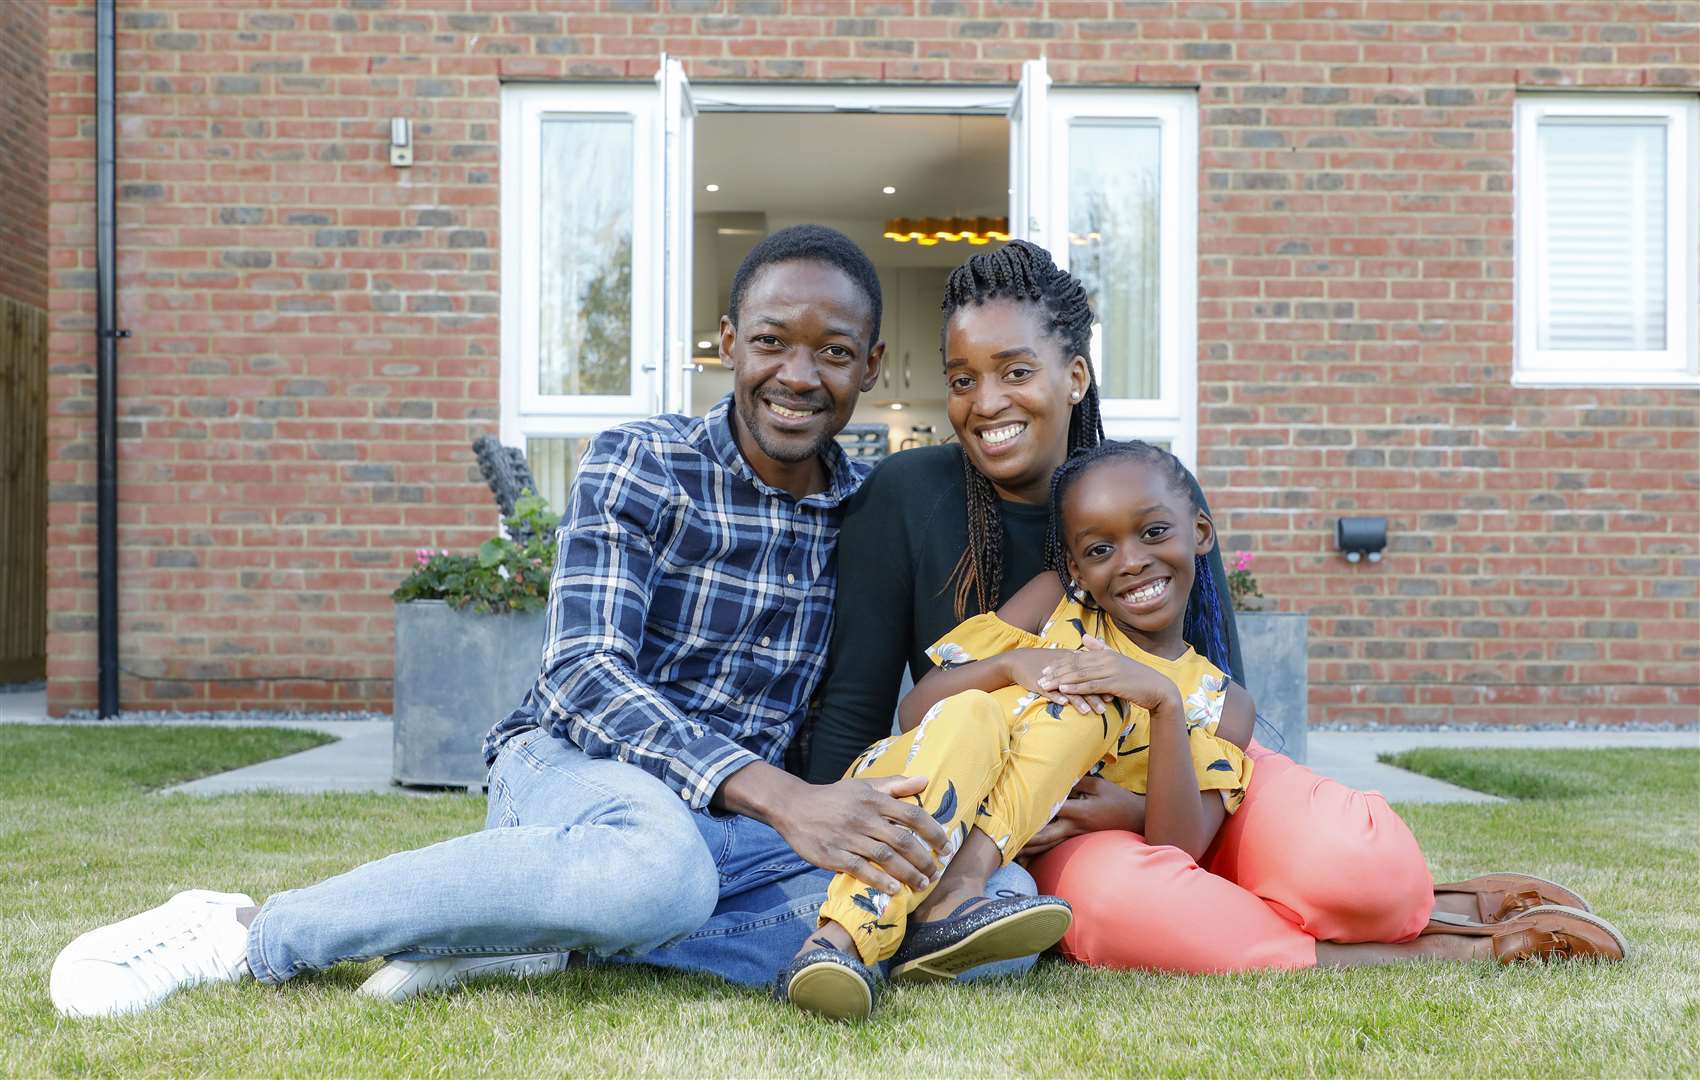 Ayo Adigun, Wariara Waireri and their daughter, Tobi, have moved into Dandara’s Willow Grove in Collier Street